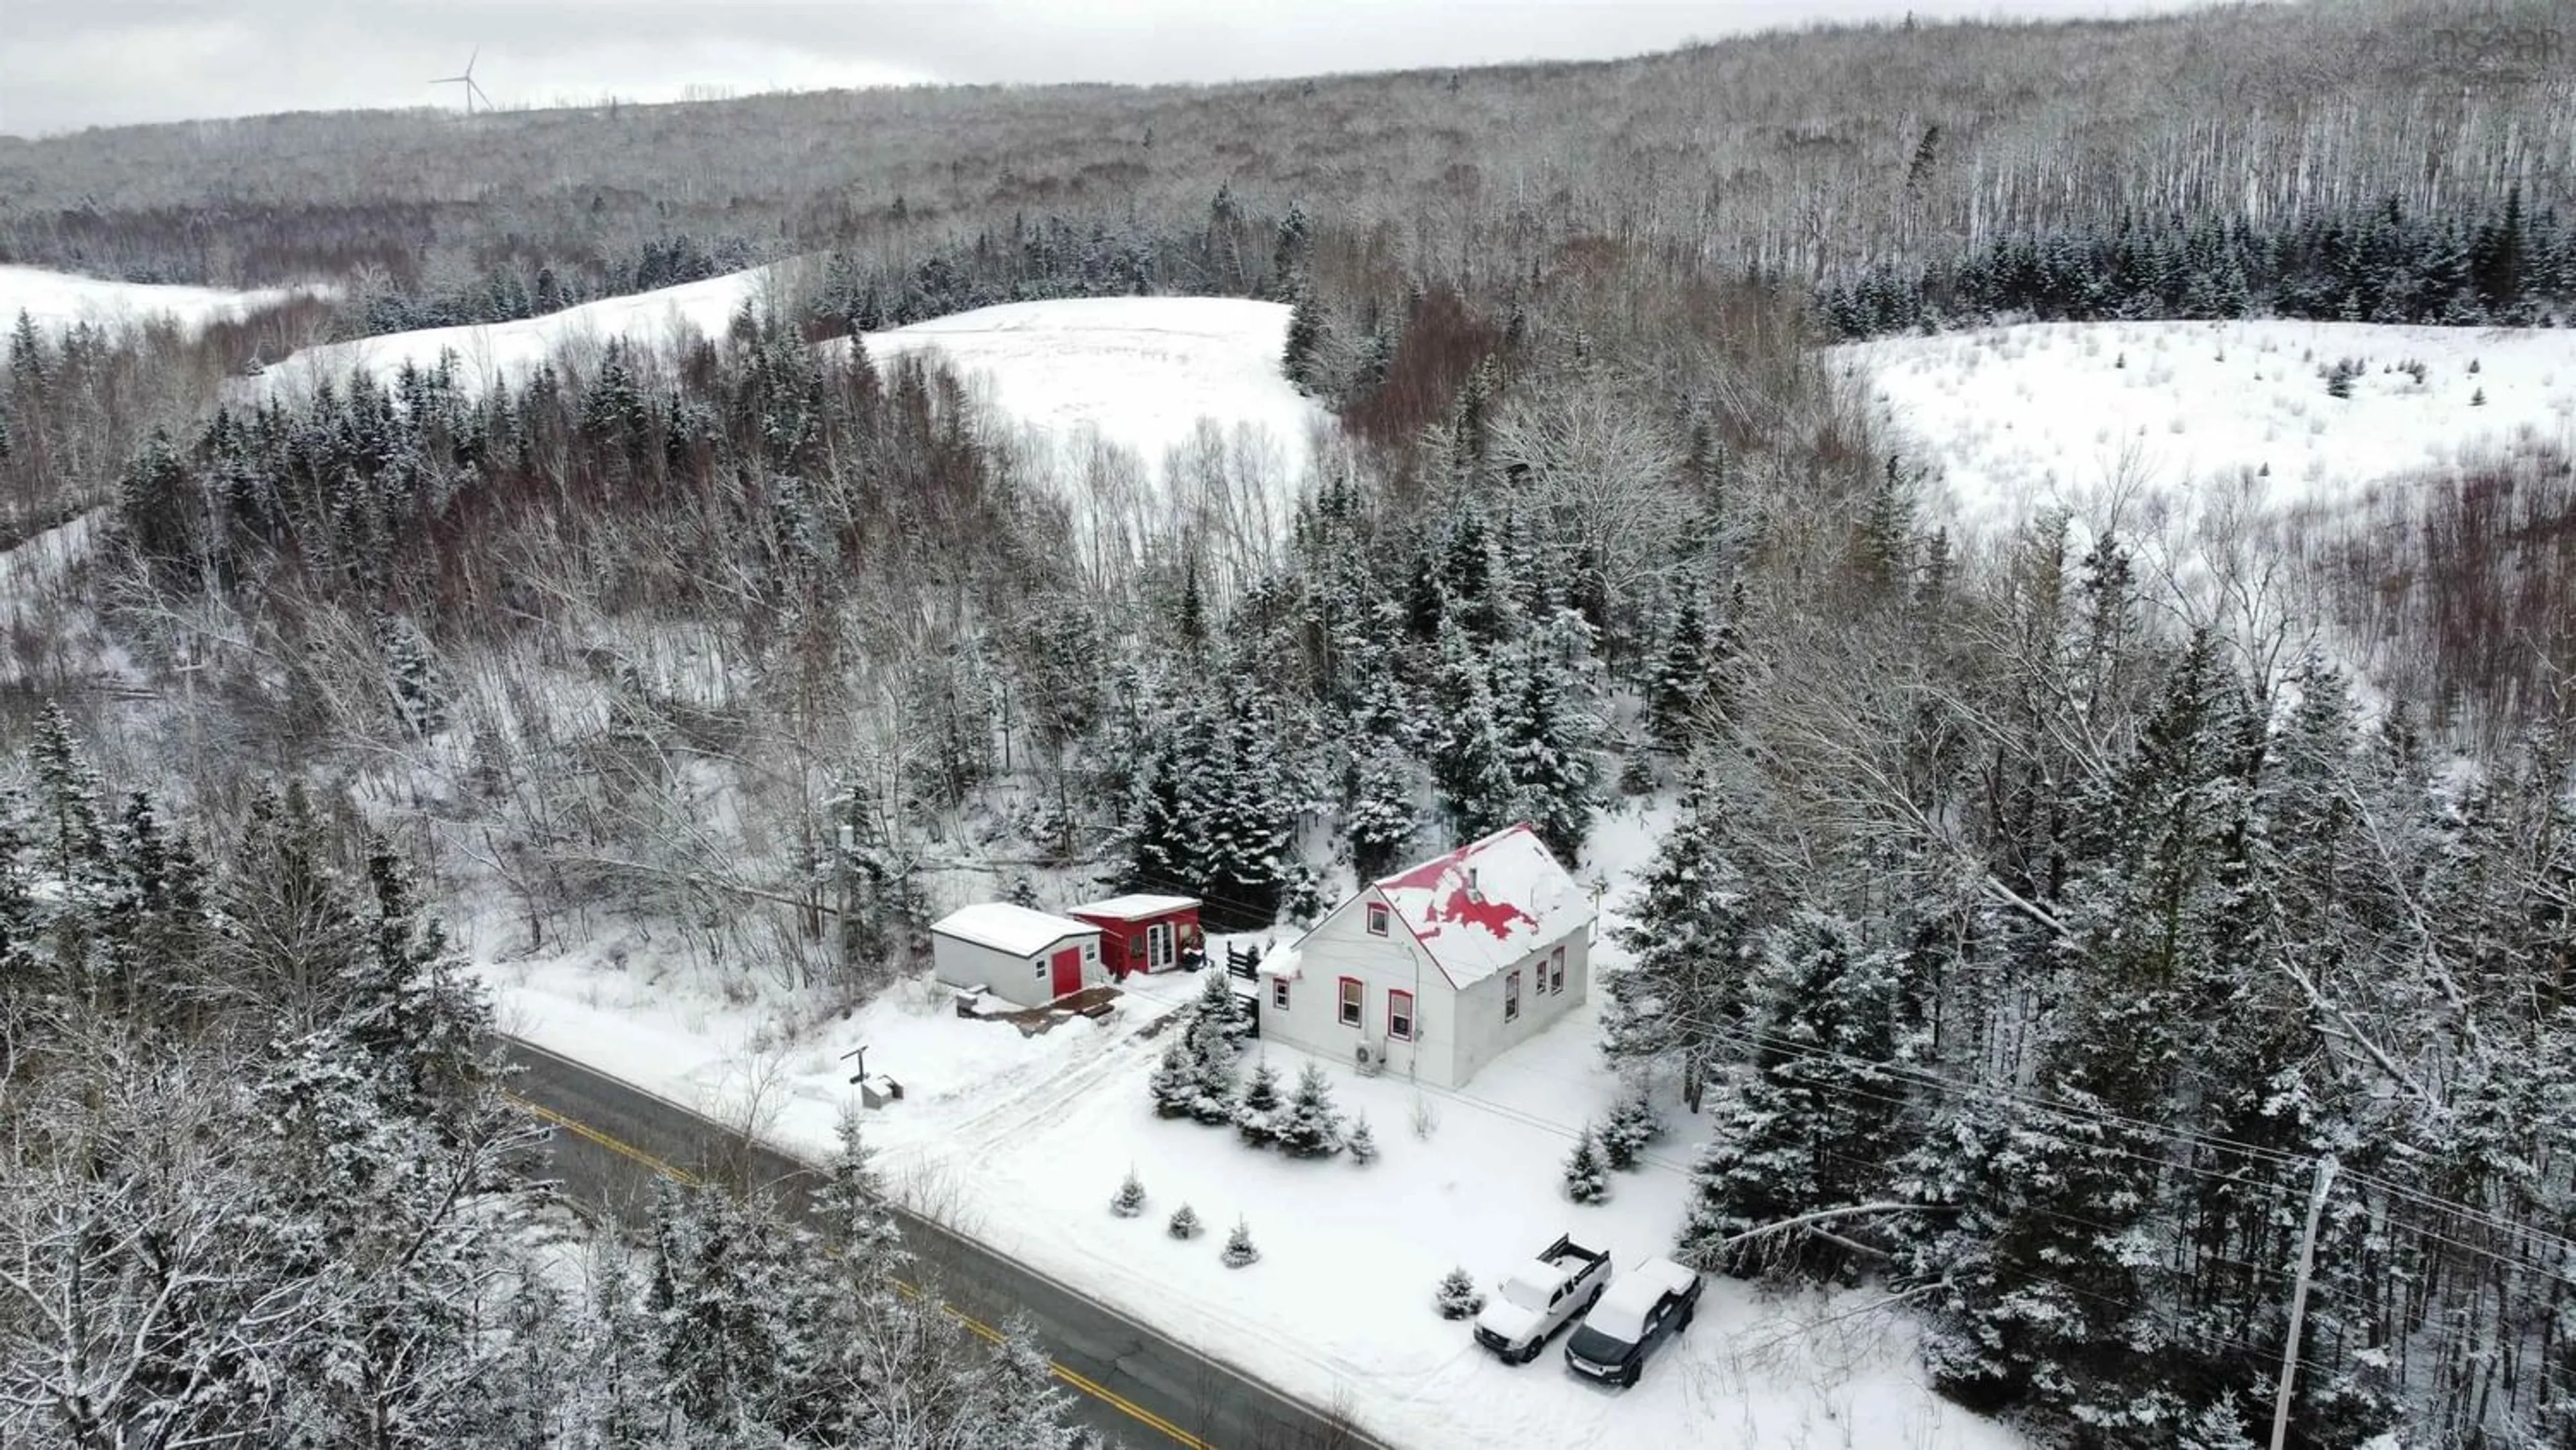 Home with unknown exterior material for 6687 311 Hwy, West Earltown Nova Scotia B0K 1V0